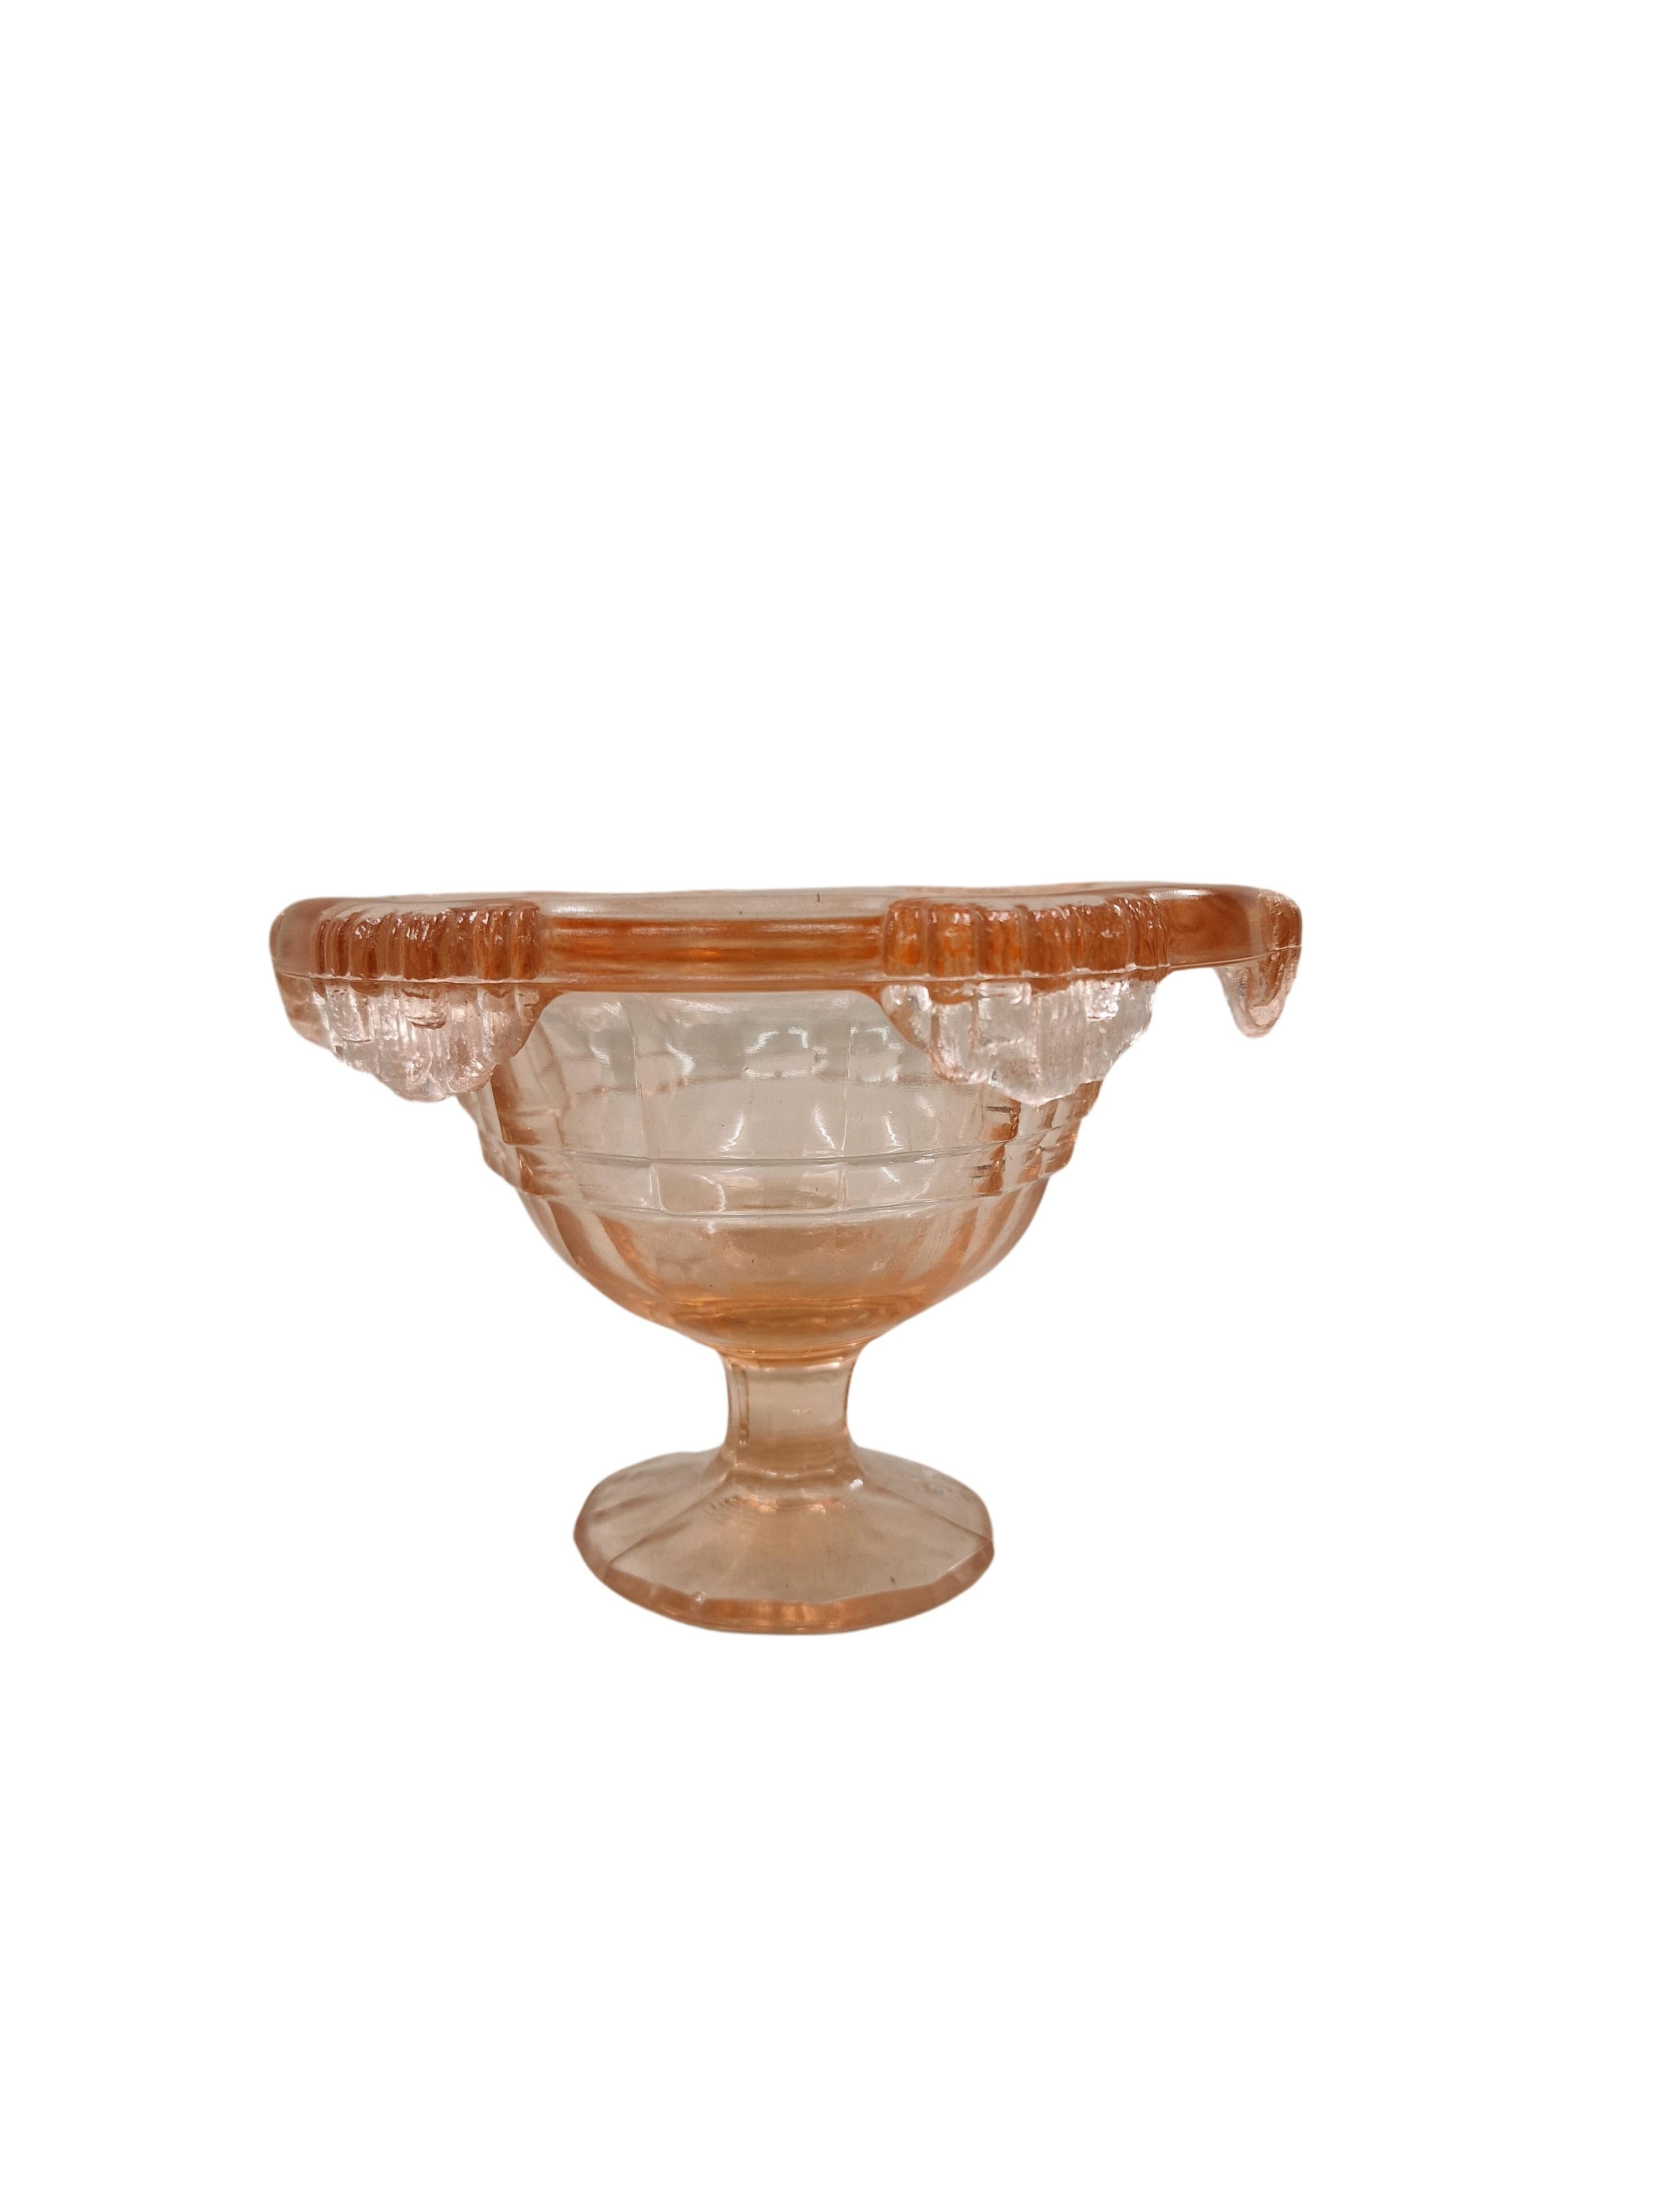 Wonderful centerpiece out of pink glass in elaborate design, an original of the Art Deco period, made in the 1930s in Italy. 

The object is of a special design. The base is round and stepped. The body opens upwards to reveal a round bowl. There are